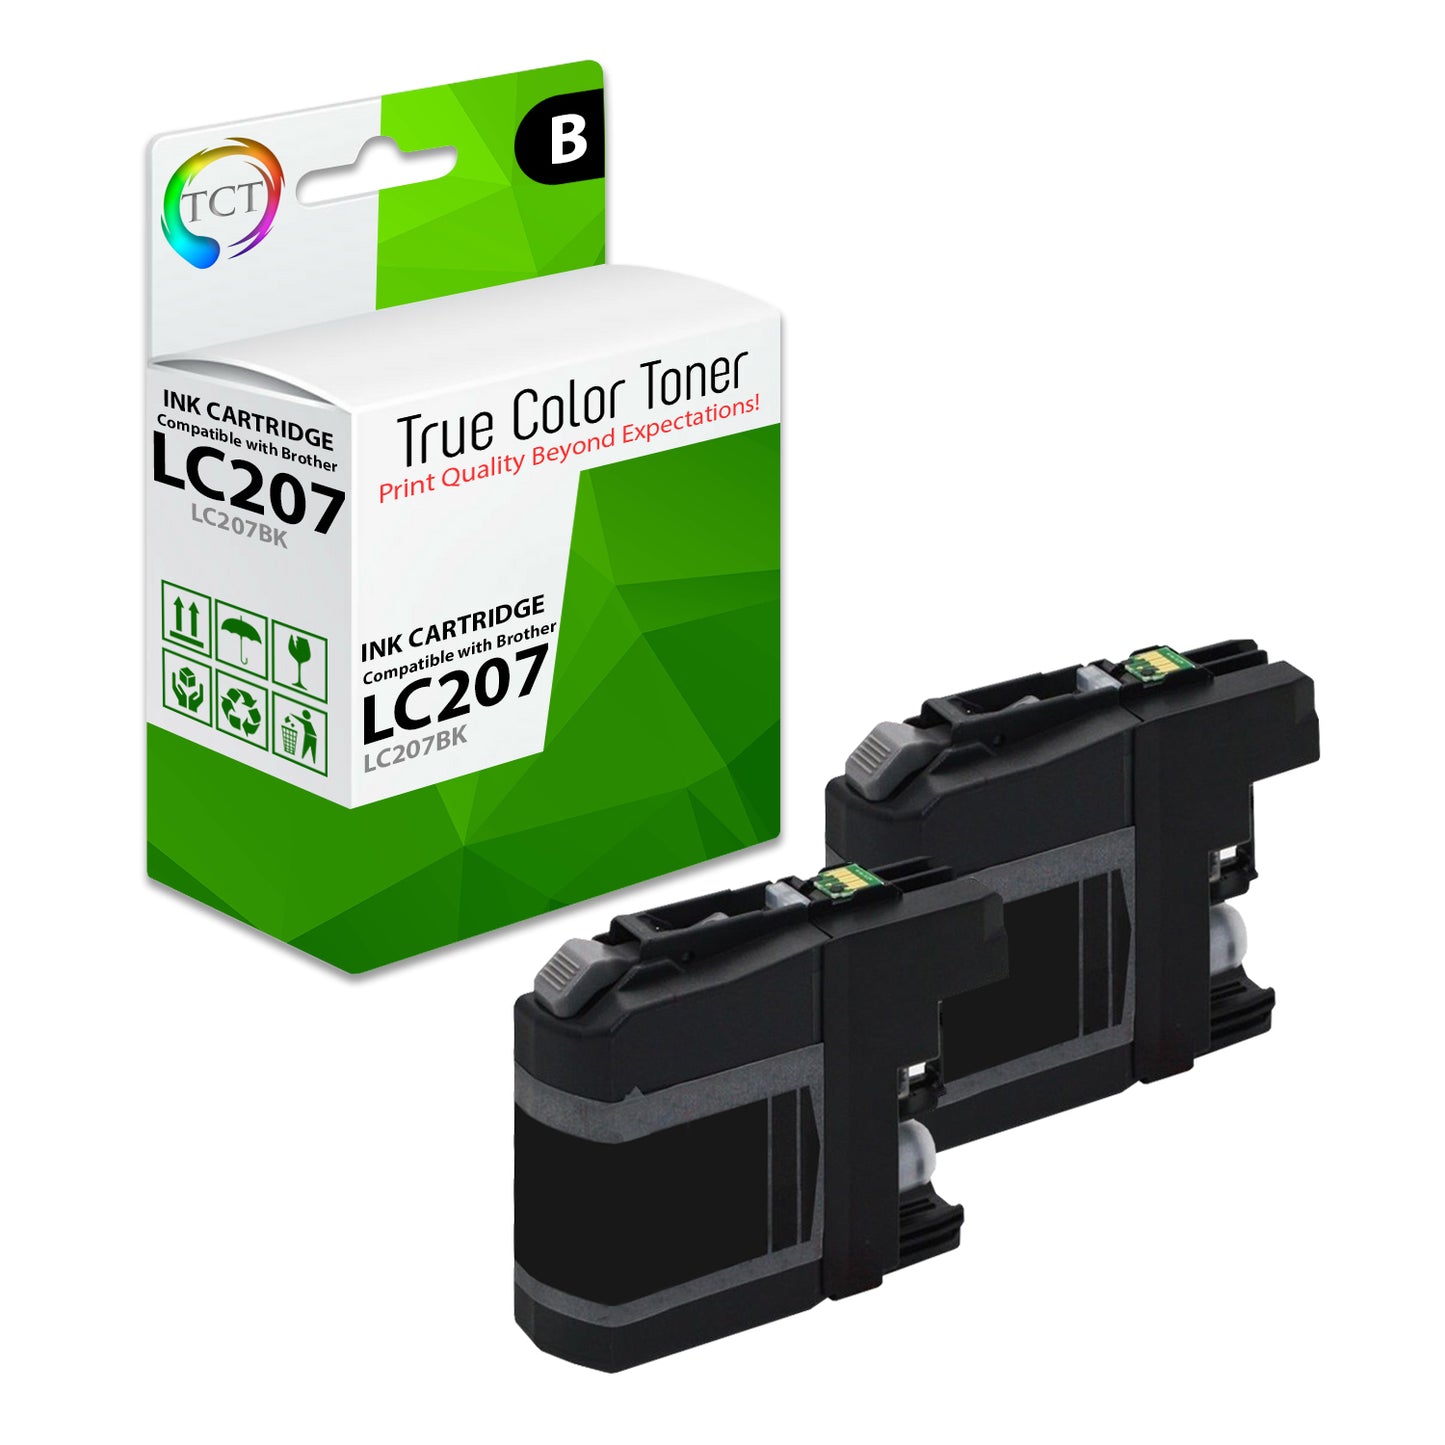 TCT Compatible Ink Cartridge Replacement for the Brother LC207 Series - 2 Pack Black